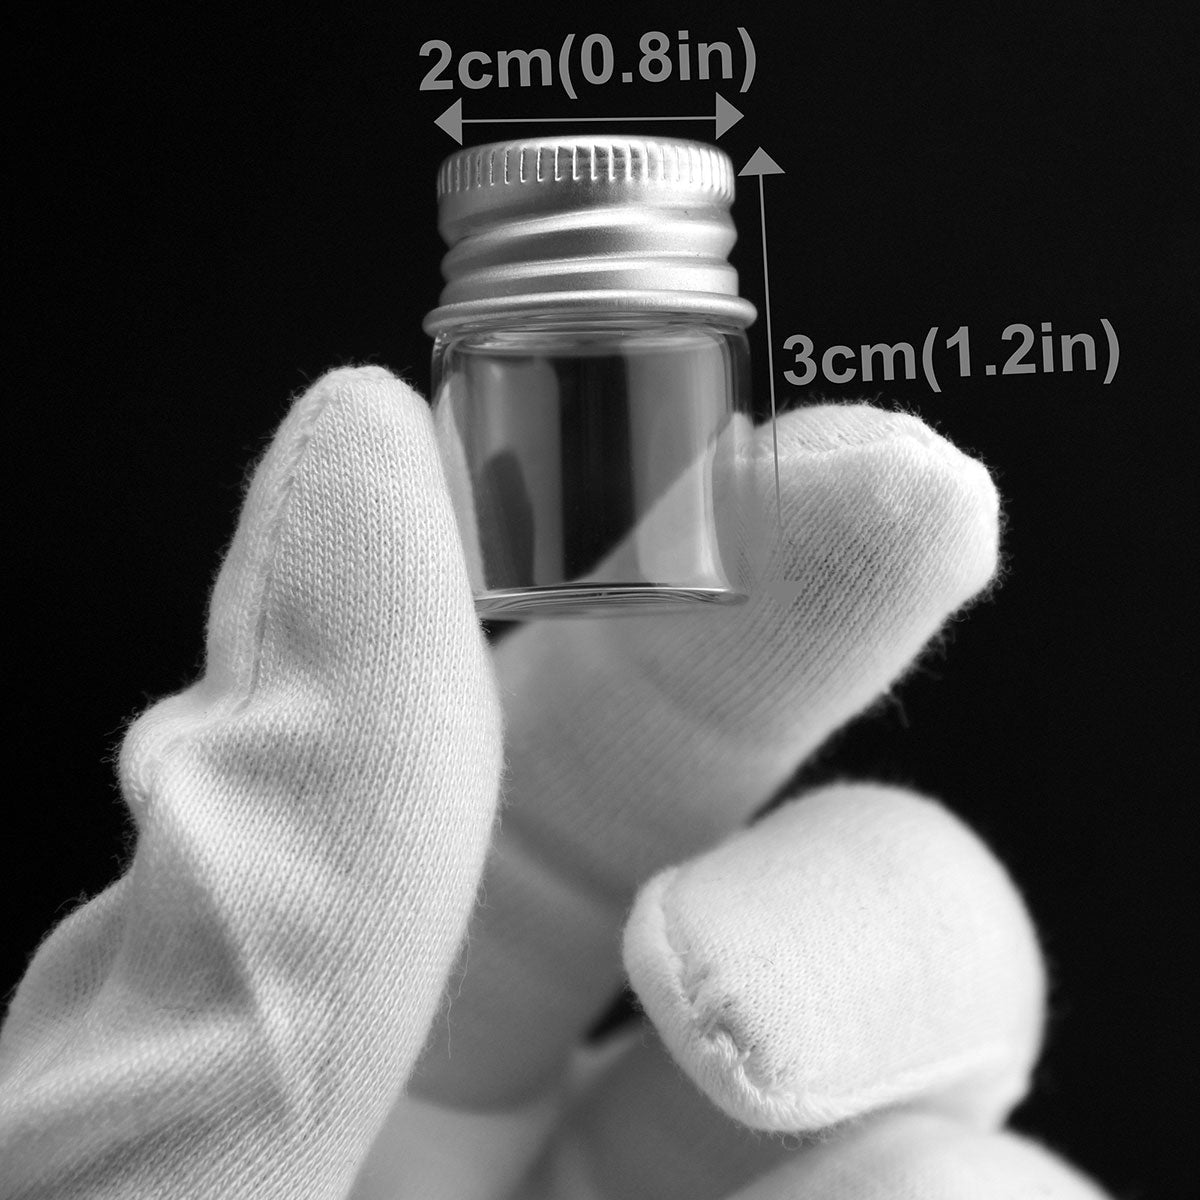 5ml- 25ml Mini Glass Bottles with Aluminium Lid for Decoration, Wish Bottles, Candy, Gift, DIY.